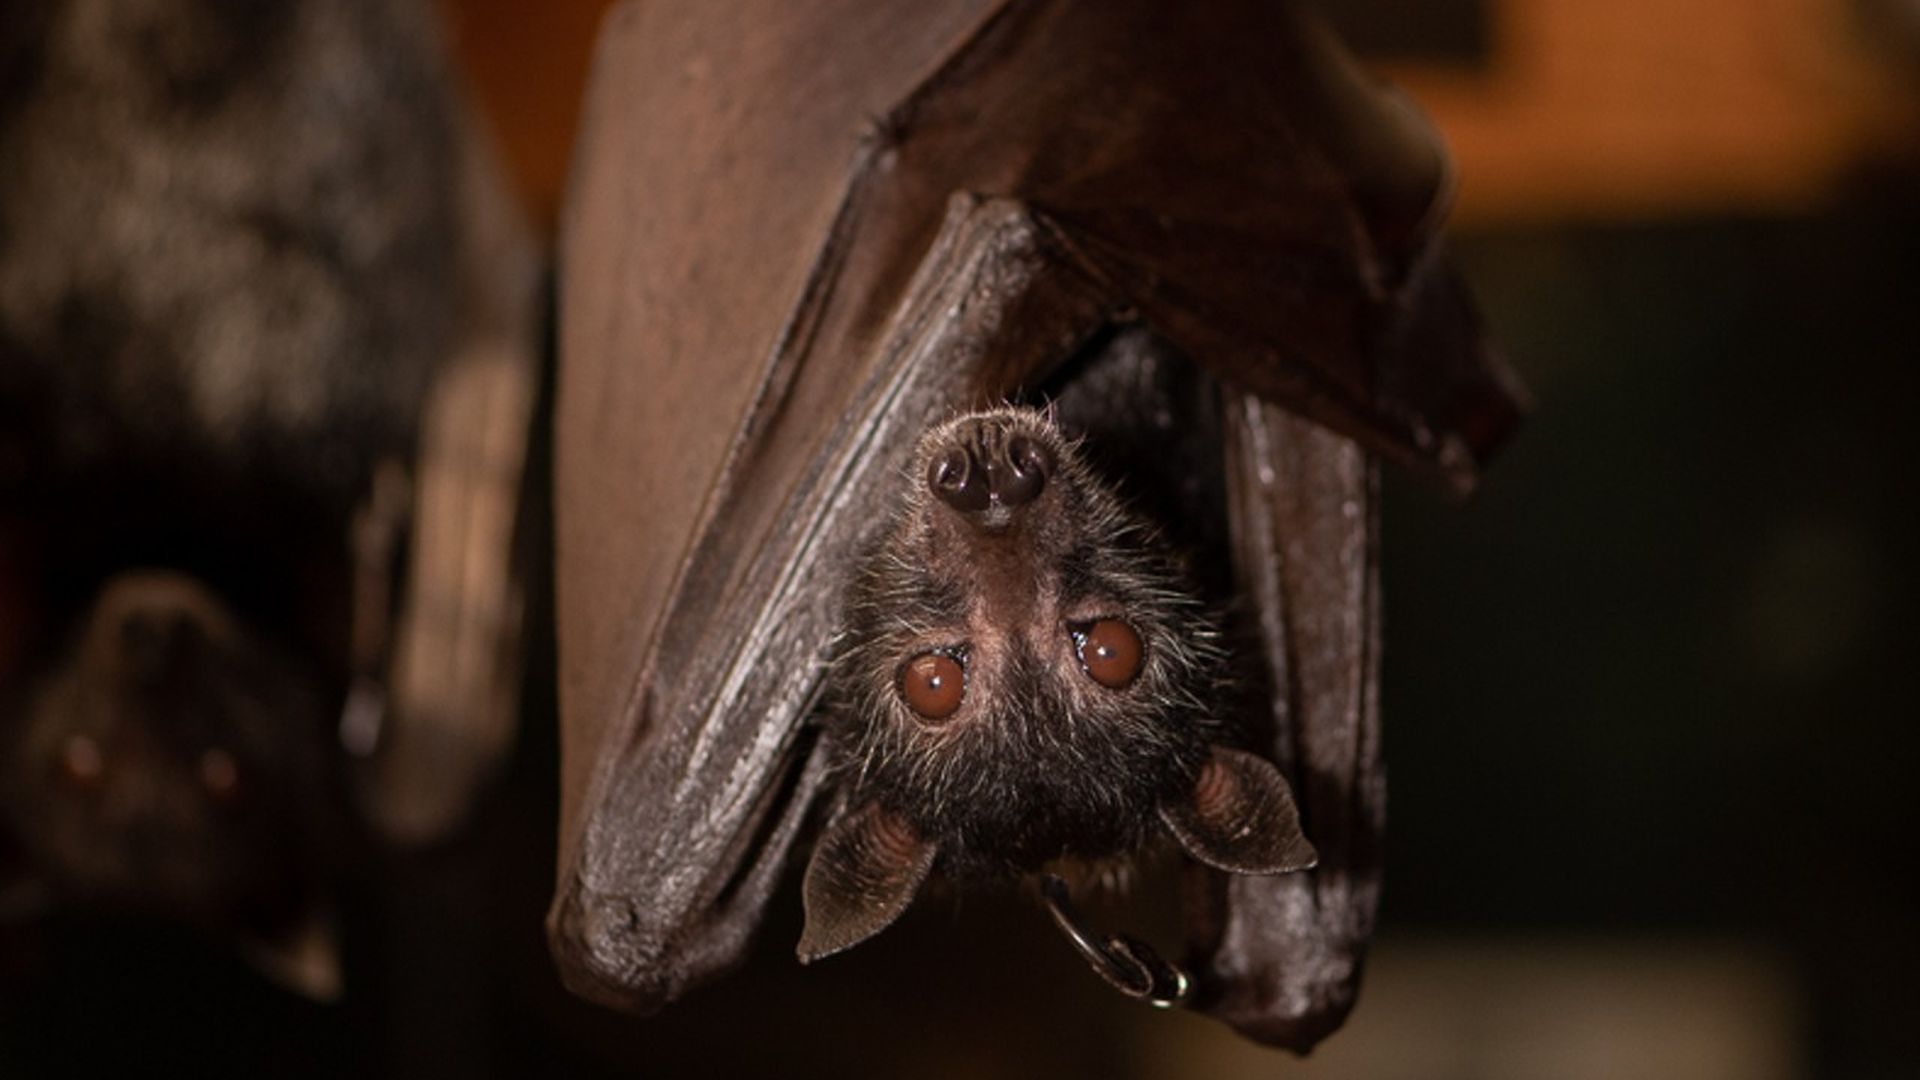 A large flying fox bat hanging upside down, wrapped in its wings